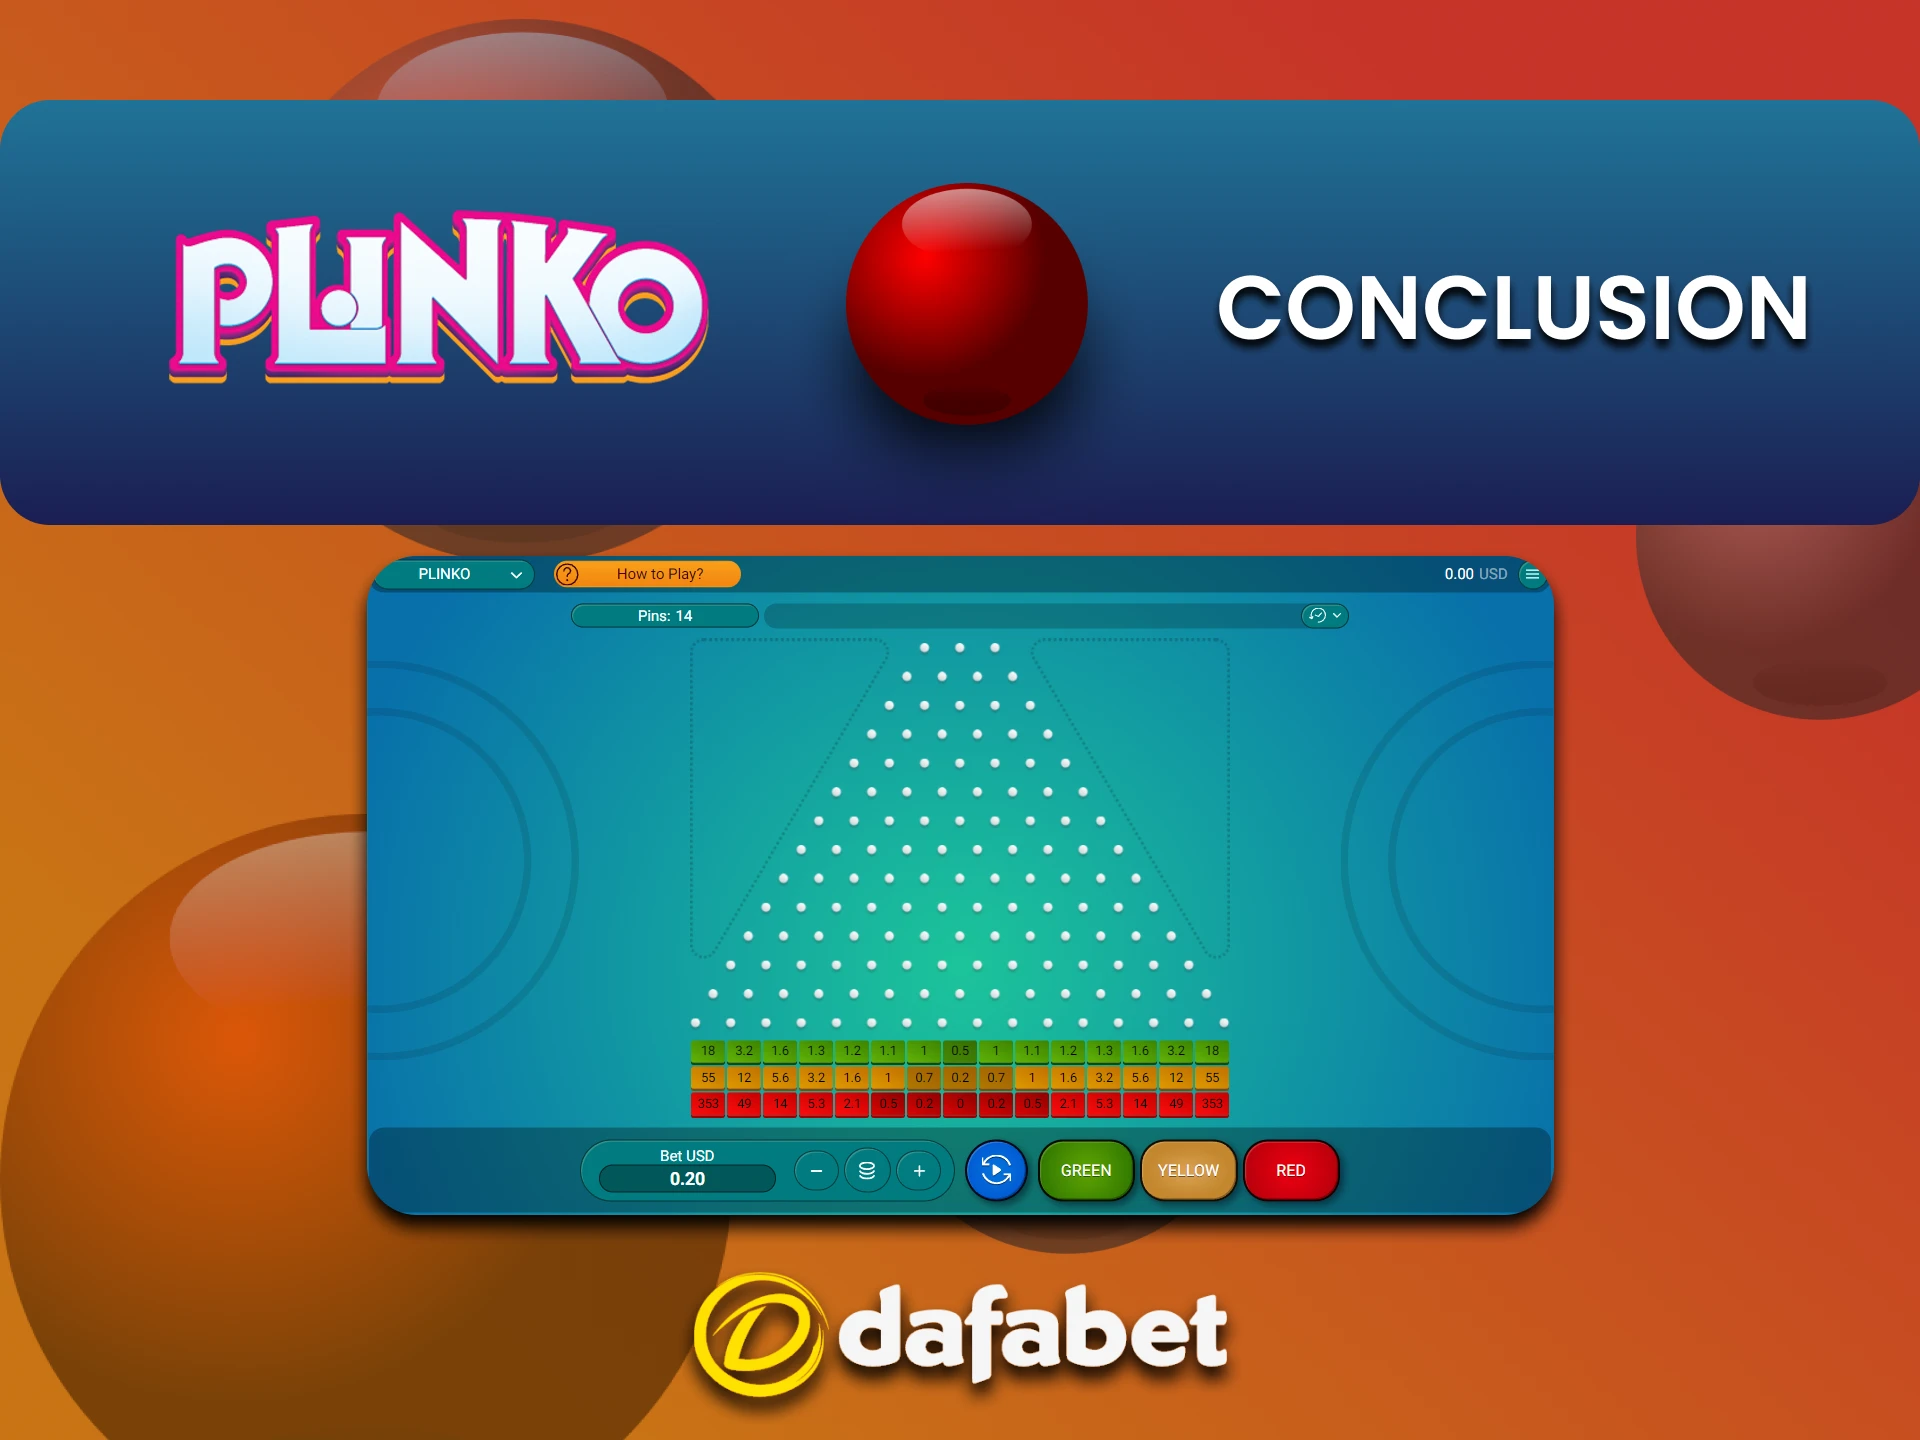 Dafabet is ideal for playing Plinko.